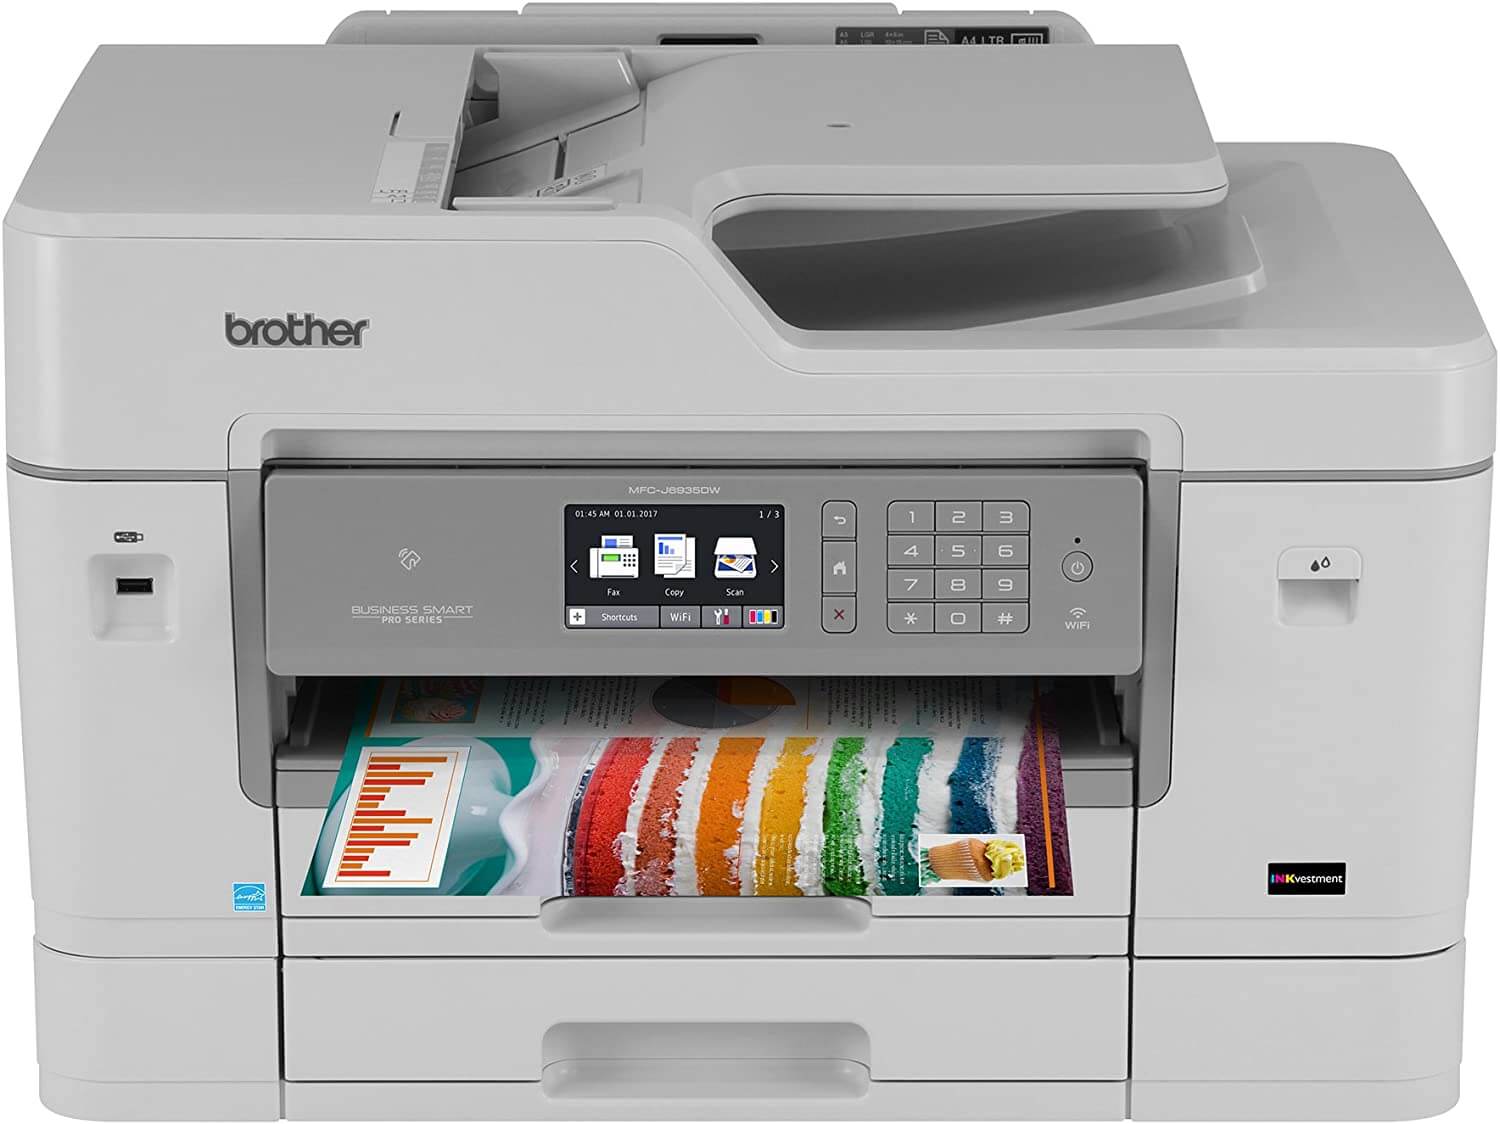 Brother MFC-J6935DW Inkjet All-in-One Color Printer